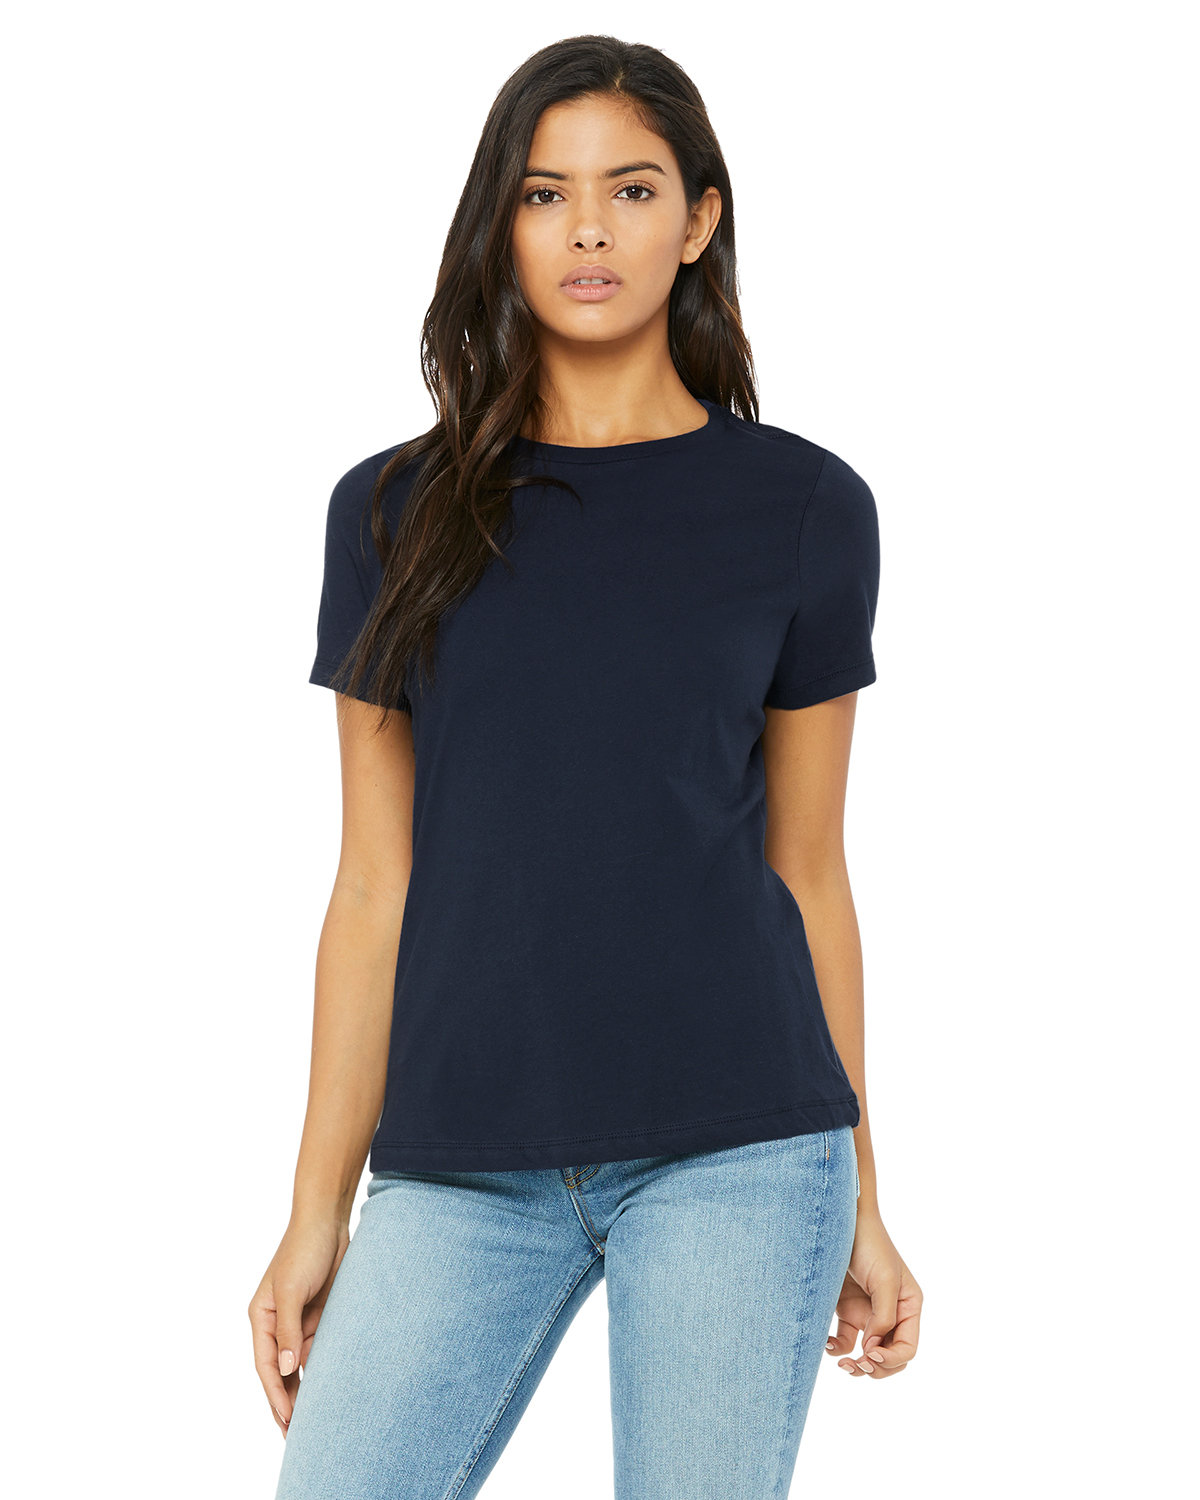 Bella + Canvas Ladies' Relaxed Jersey Short-Sleeve T-Shirt navy 